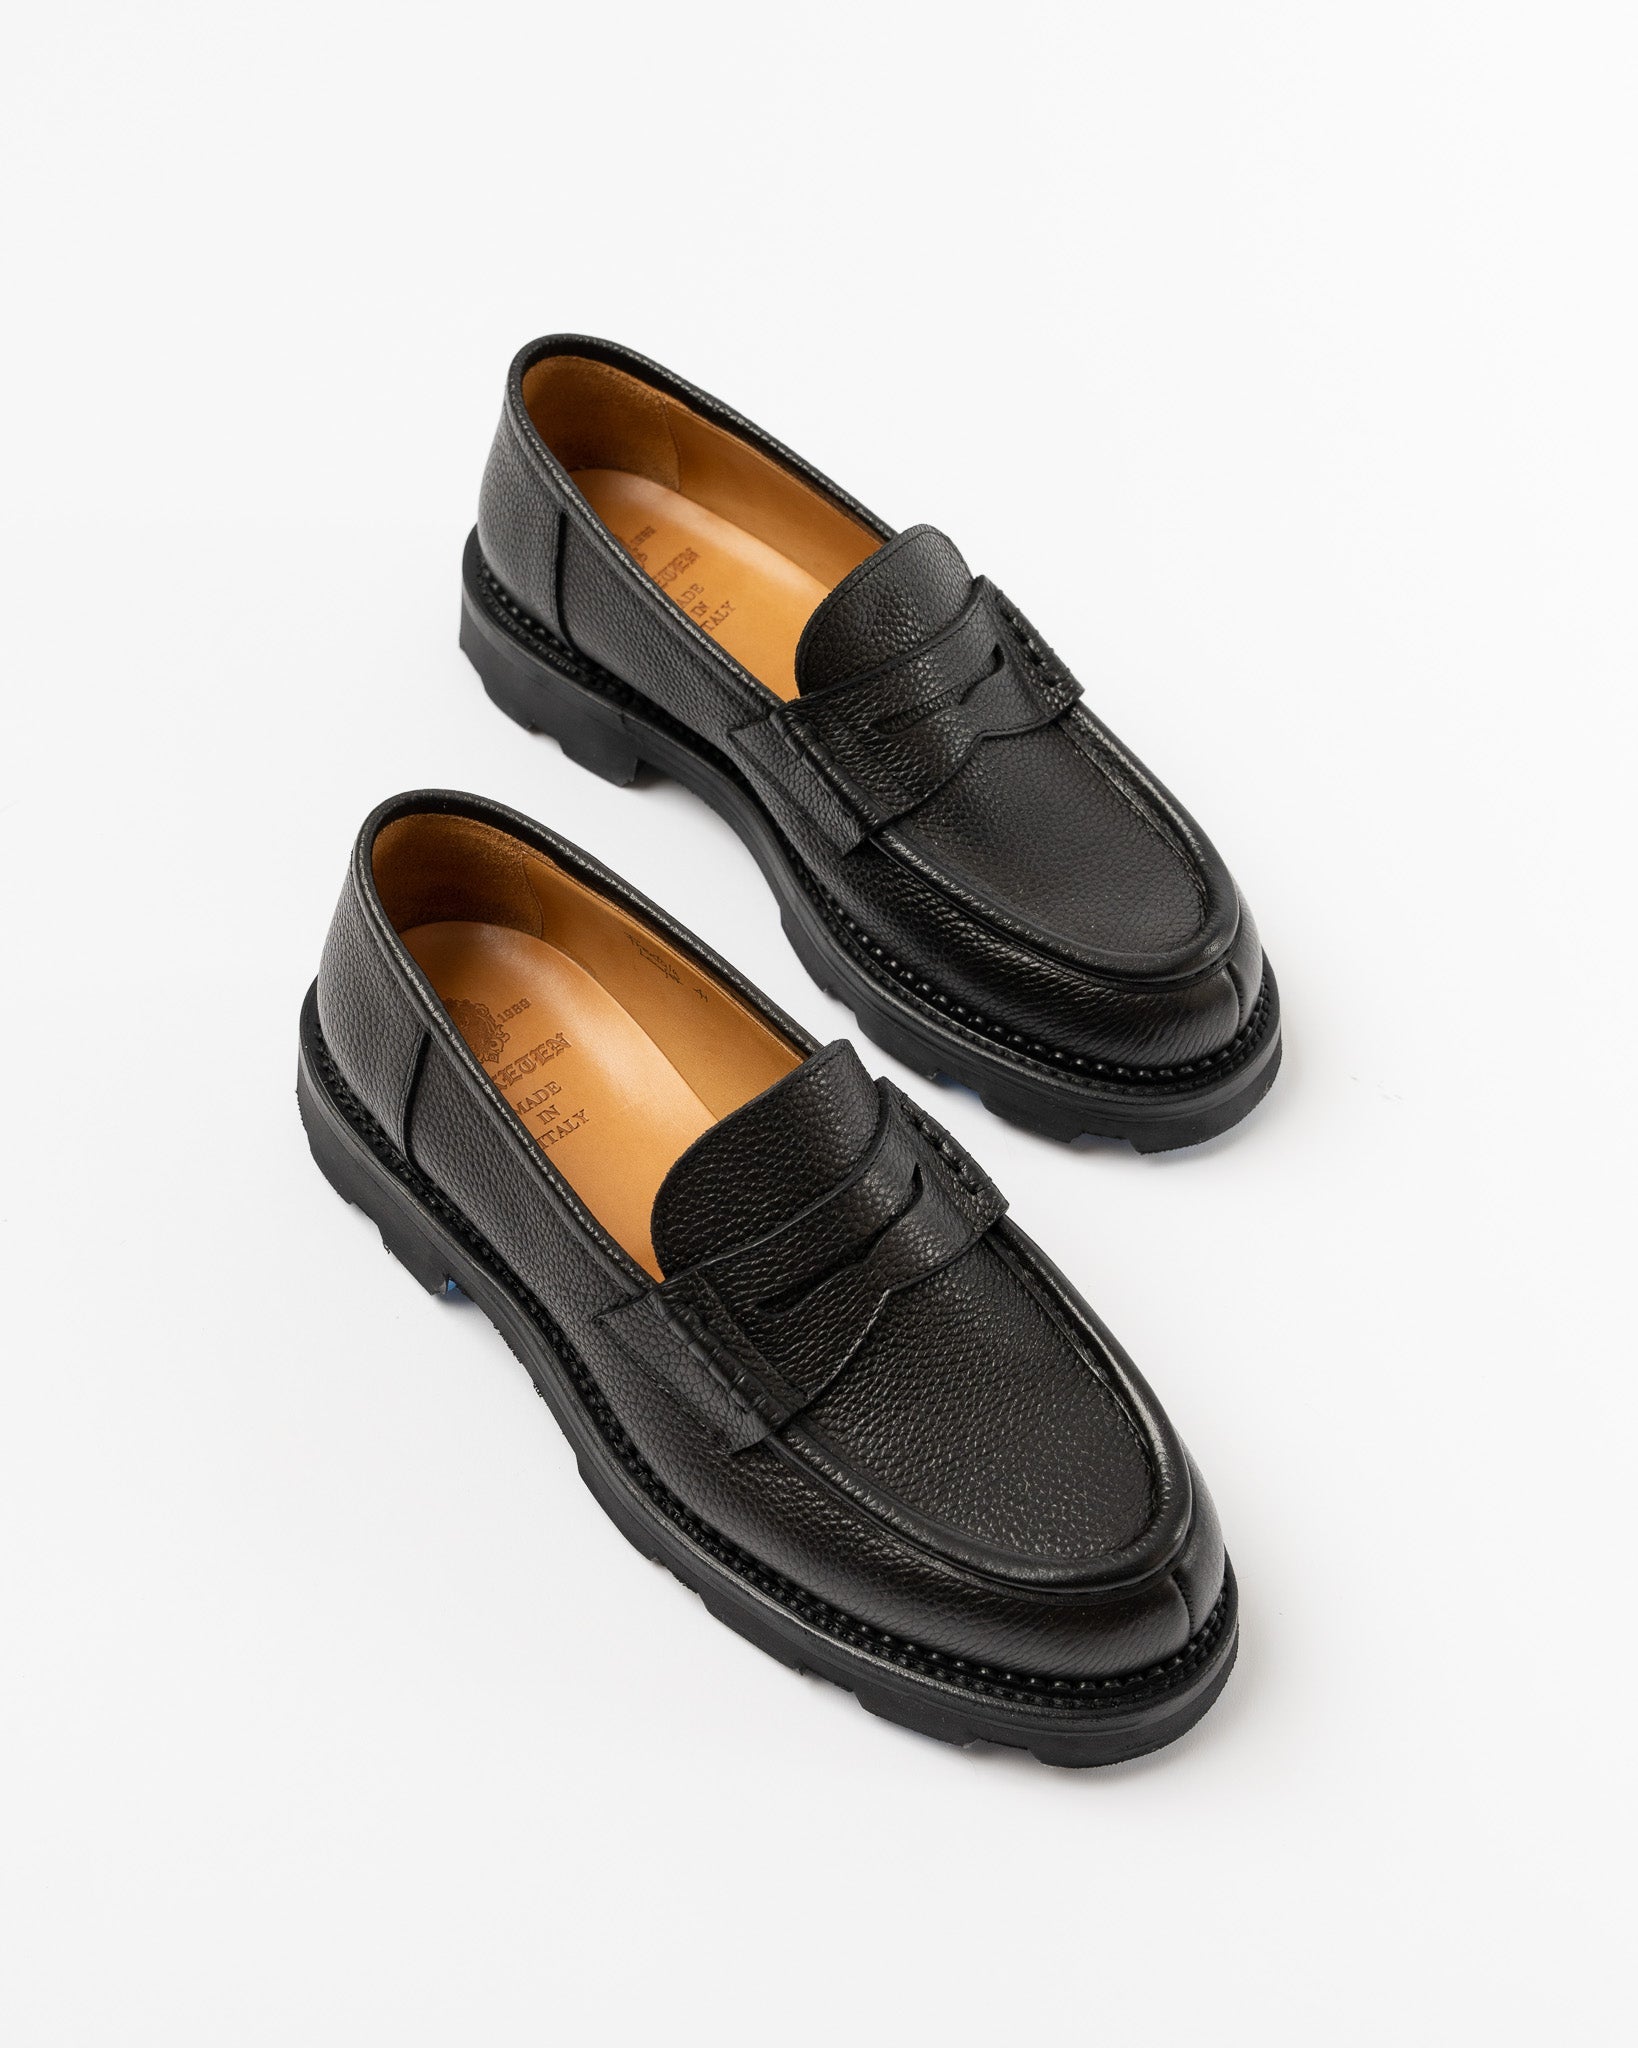 Yuketen Frentaly Loafer in Parelmo Black Curated at Jake and Jones